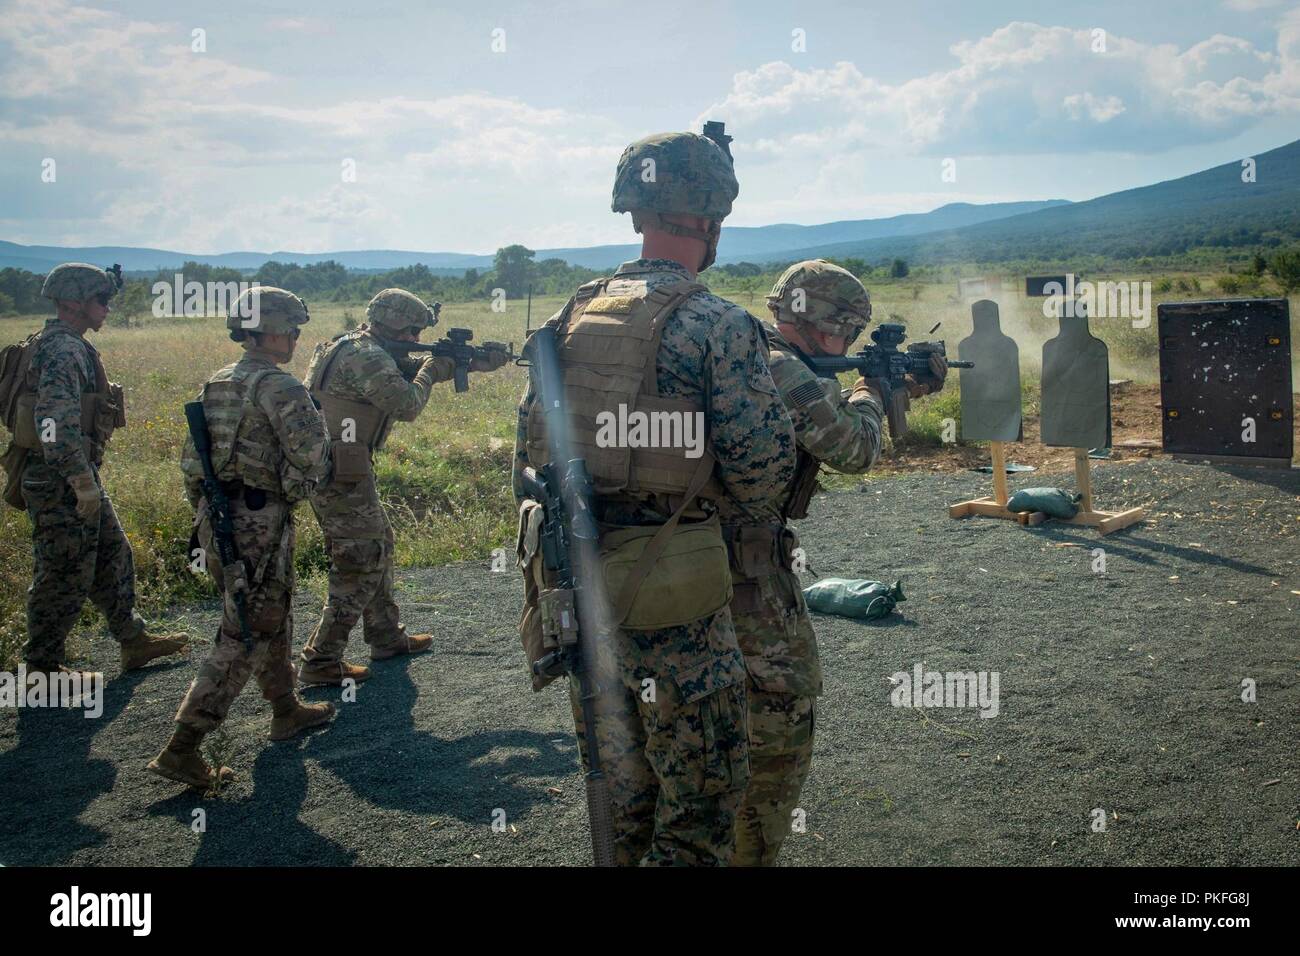 U.S. Marines with Black Sea Rotational Force 18.1 supervise U.S. Army soldiers executing an advanced portion of a Combat Marksmanship Program range during Exercise Platinum Lion 18 at Novo Selo Training Area, Bulgaria, Aug. 5, 2018. Platinum Lion is an annual field training exercise that reinforces relationships in a joint training environment, builds understanding of partner nation tactics, techniques and procedures, and increases interoperability with Allied and partner forces. Stock Photo